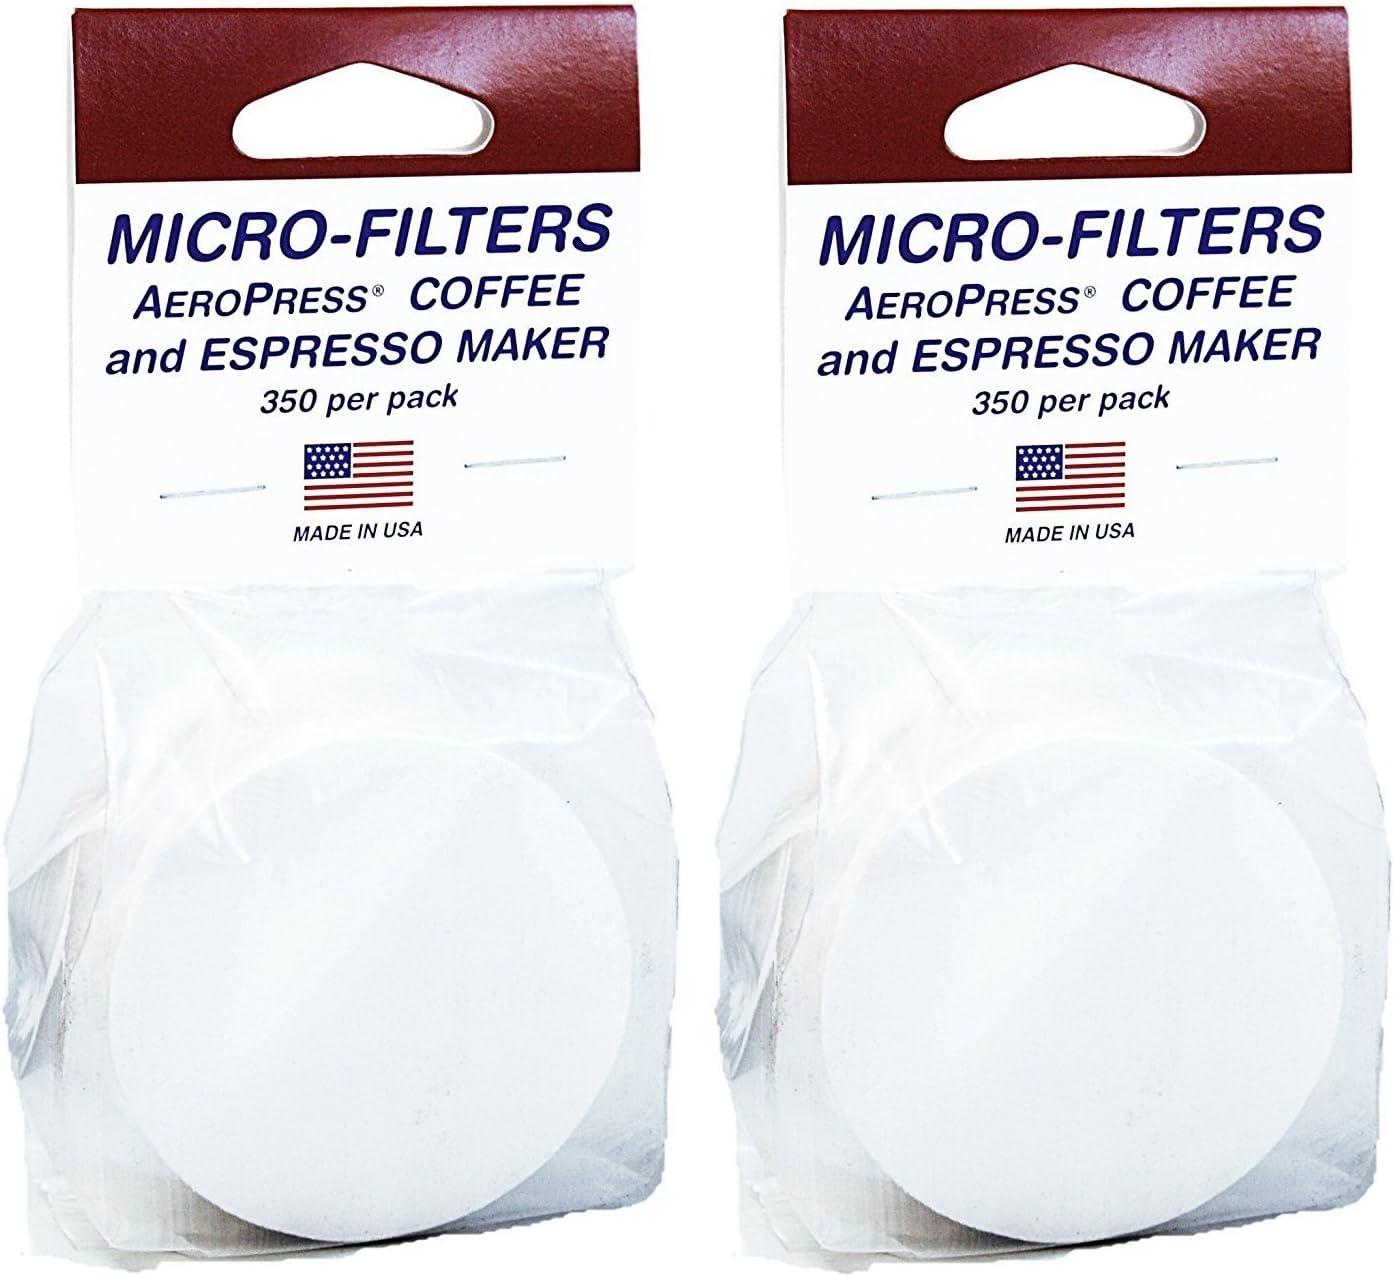 AeroPress Replacement Filters, 2 Pack - Microfilters For The AeroPress Coffee And Espresso Maker - 700 count